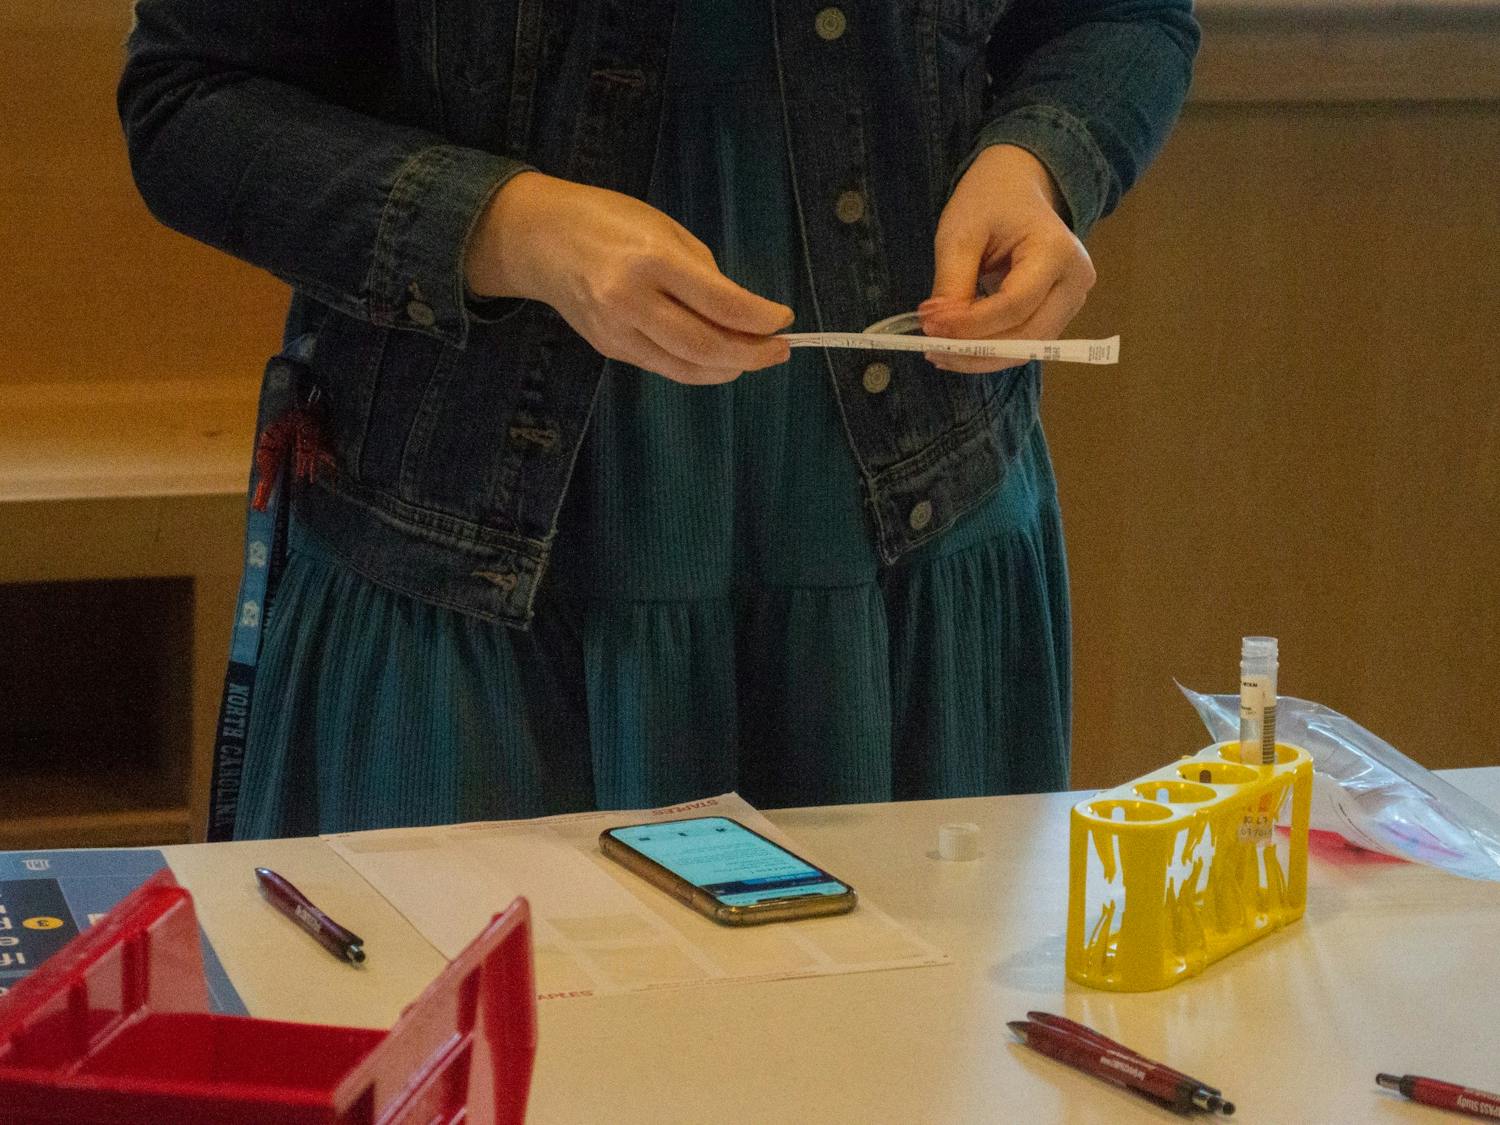 A student opens the testing swab while taking a COVID-19 test at the Rams Head Recreation CTTP testing site on Jan. 19, 2021.